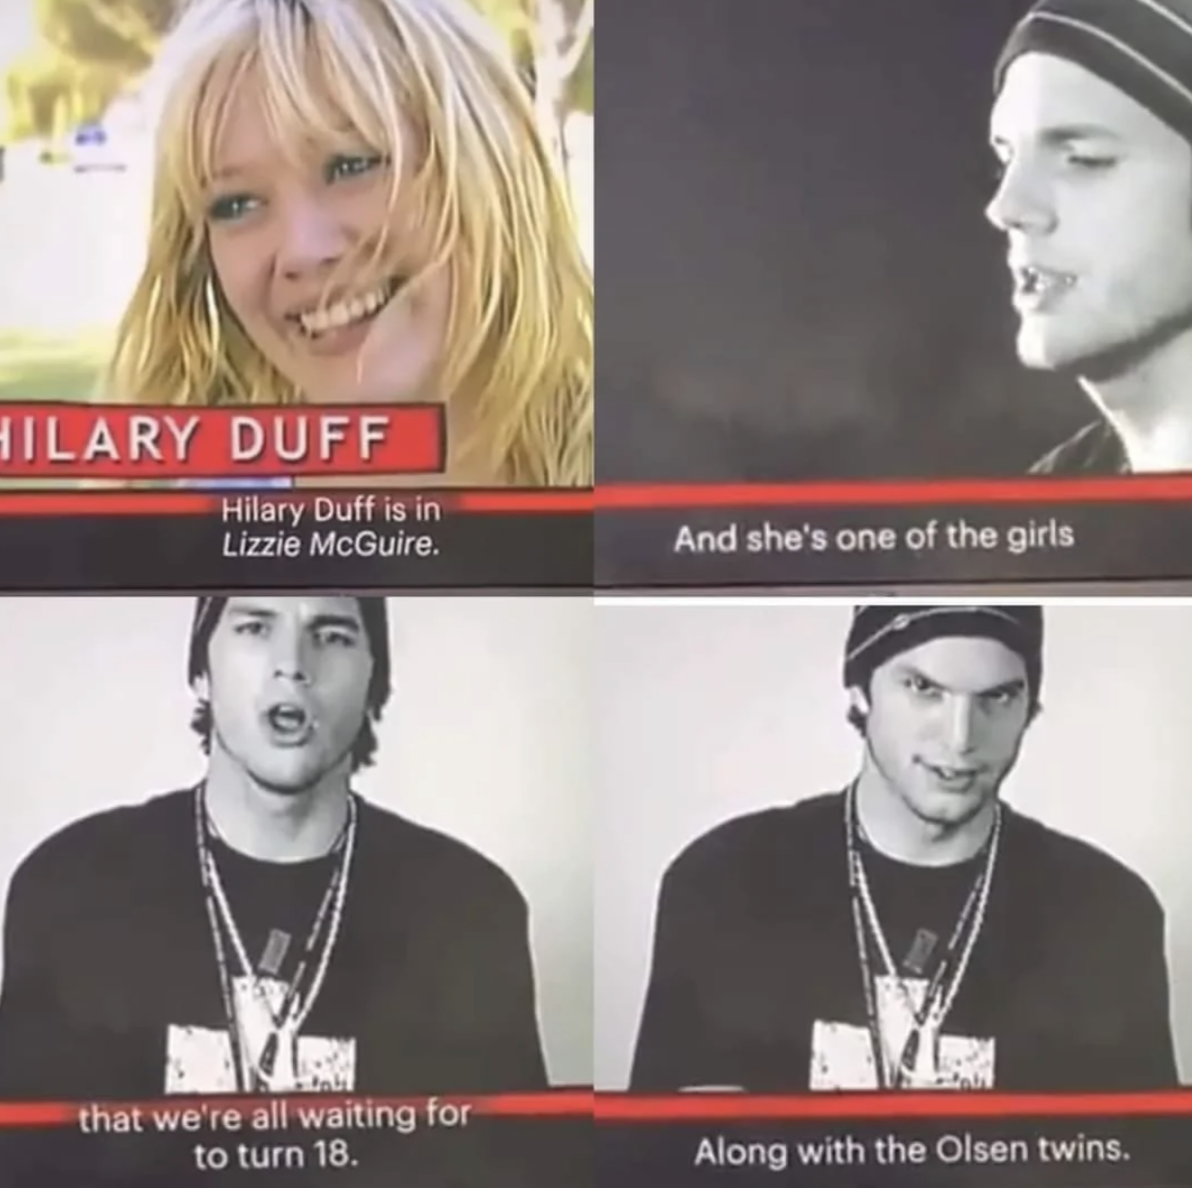 ashton kutcher hilary duff quote - Hilary Duff Hilary Duff is in Lizzie McGuire. that we're all waiting for to turn 18. And she's one of the girls Along with the Olsen twins.